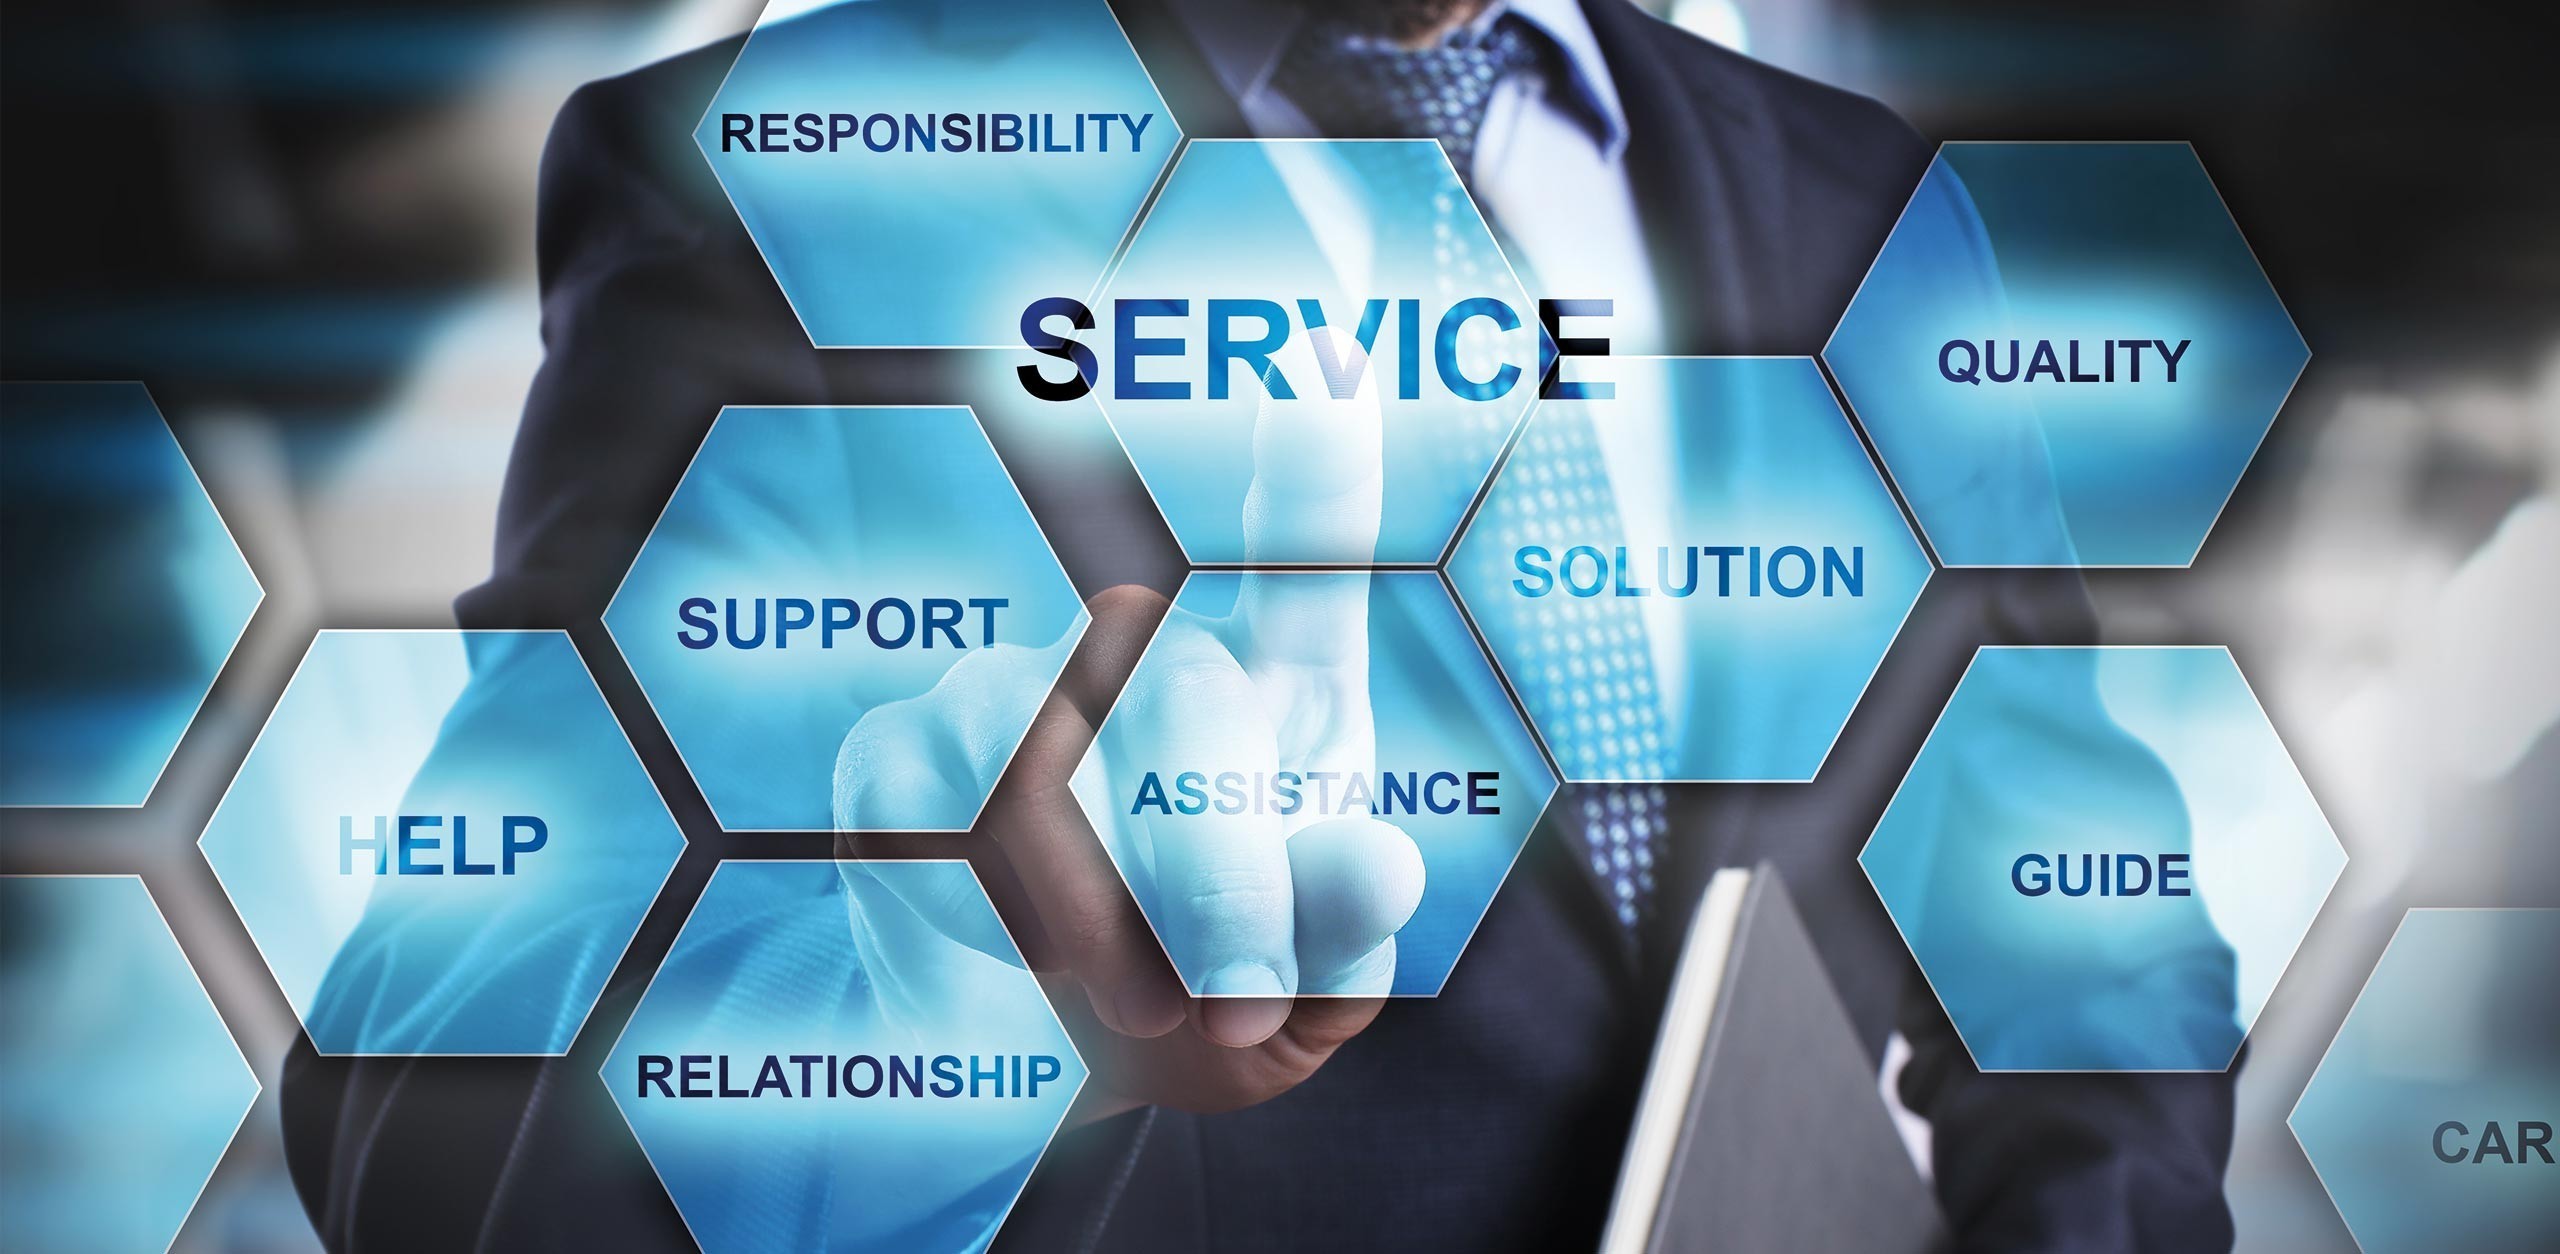 Why Client choose Remote Techs for IT Support in Los Angeles